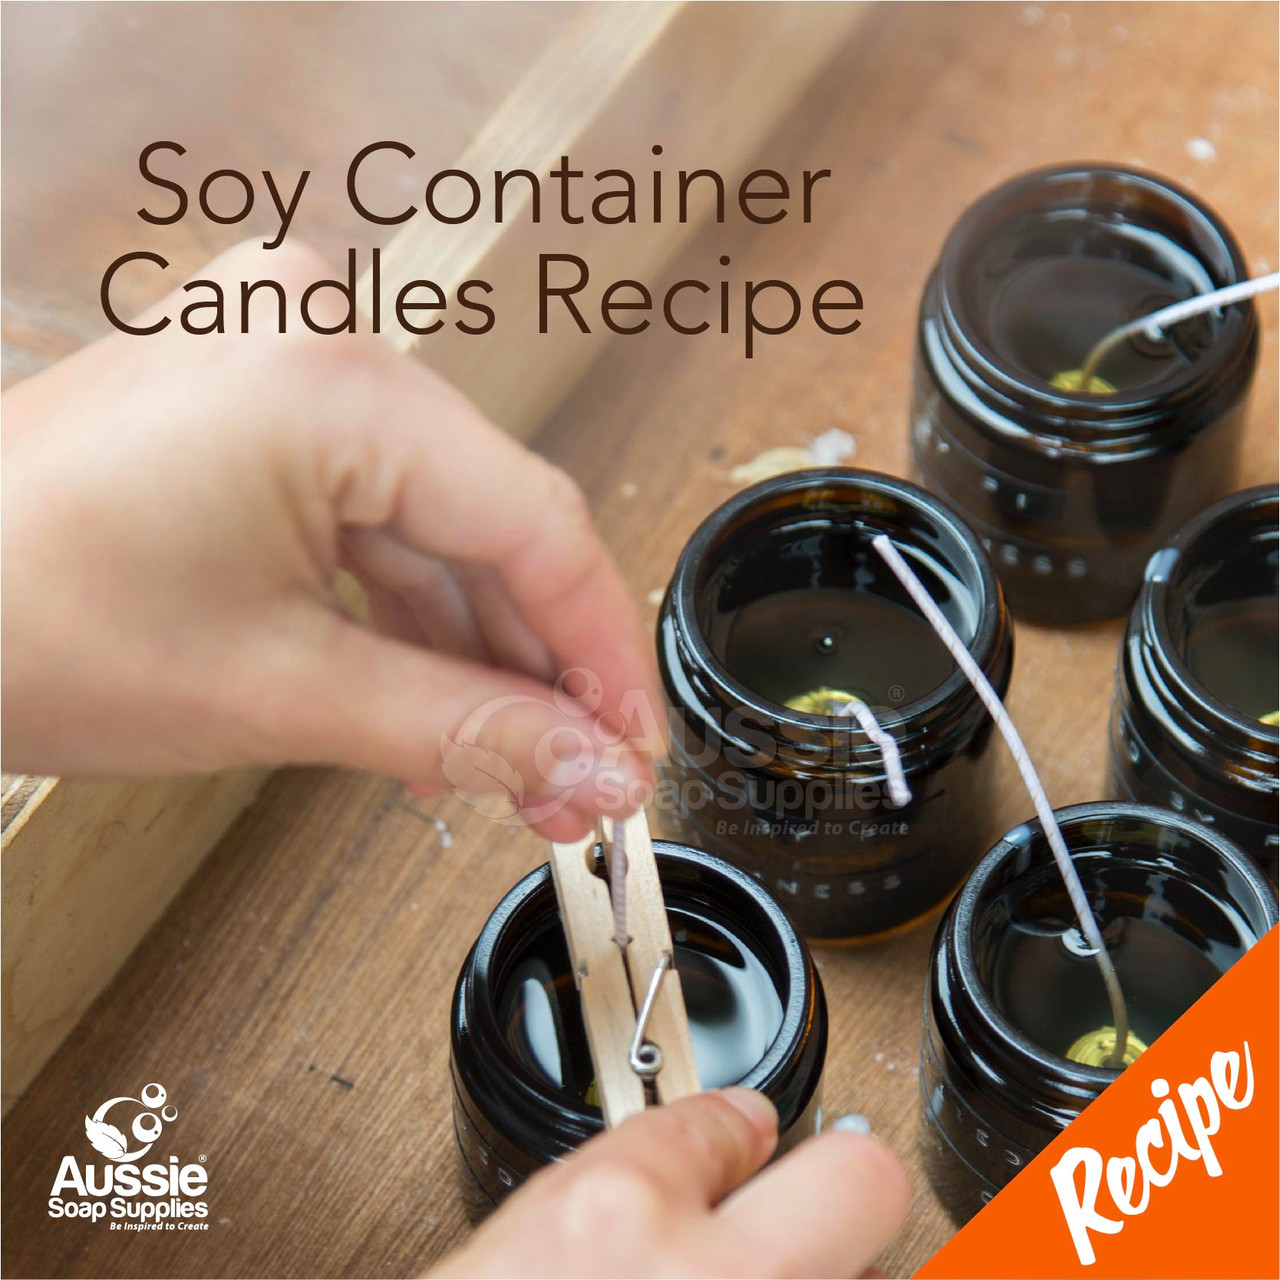 How to Make Soy Container Candles